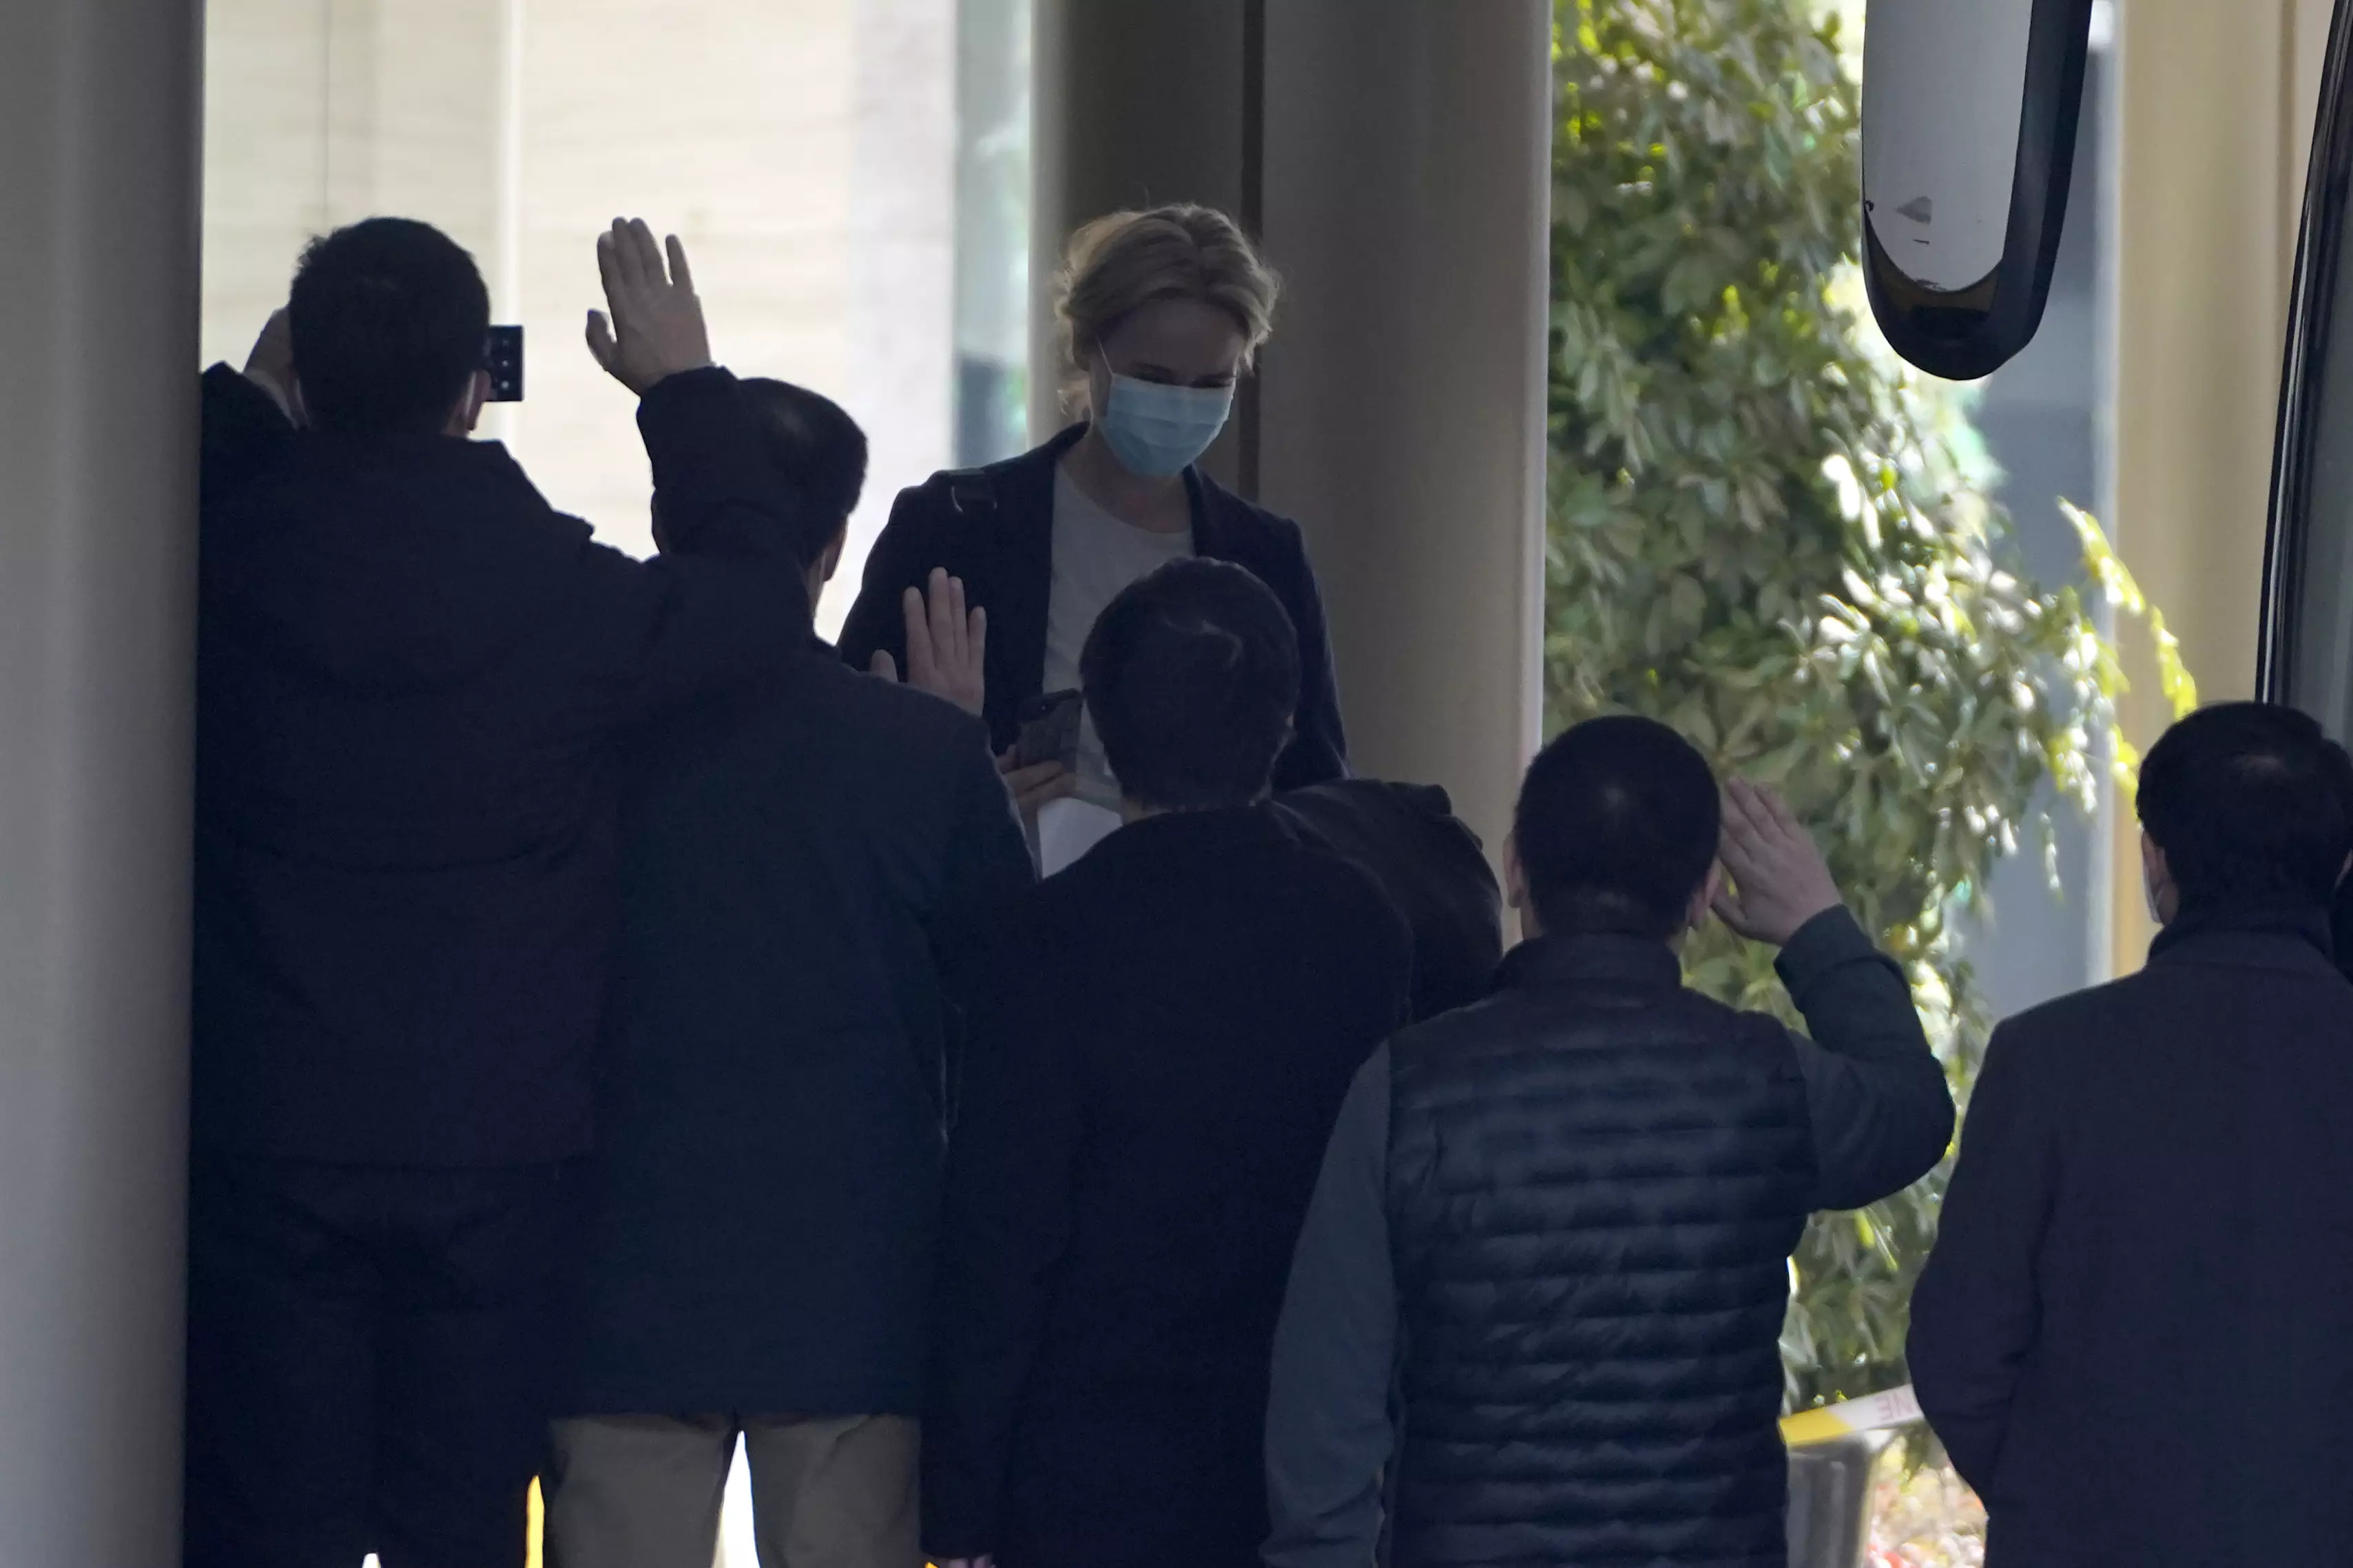 The WHO investigators arrived in Wuhan on 14 January.